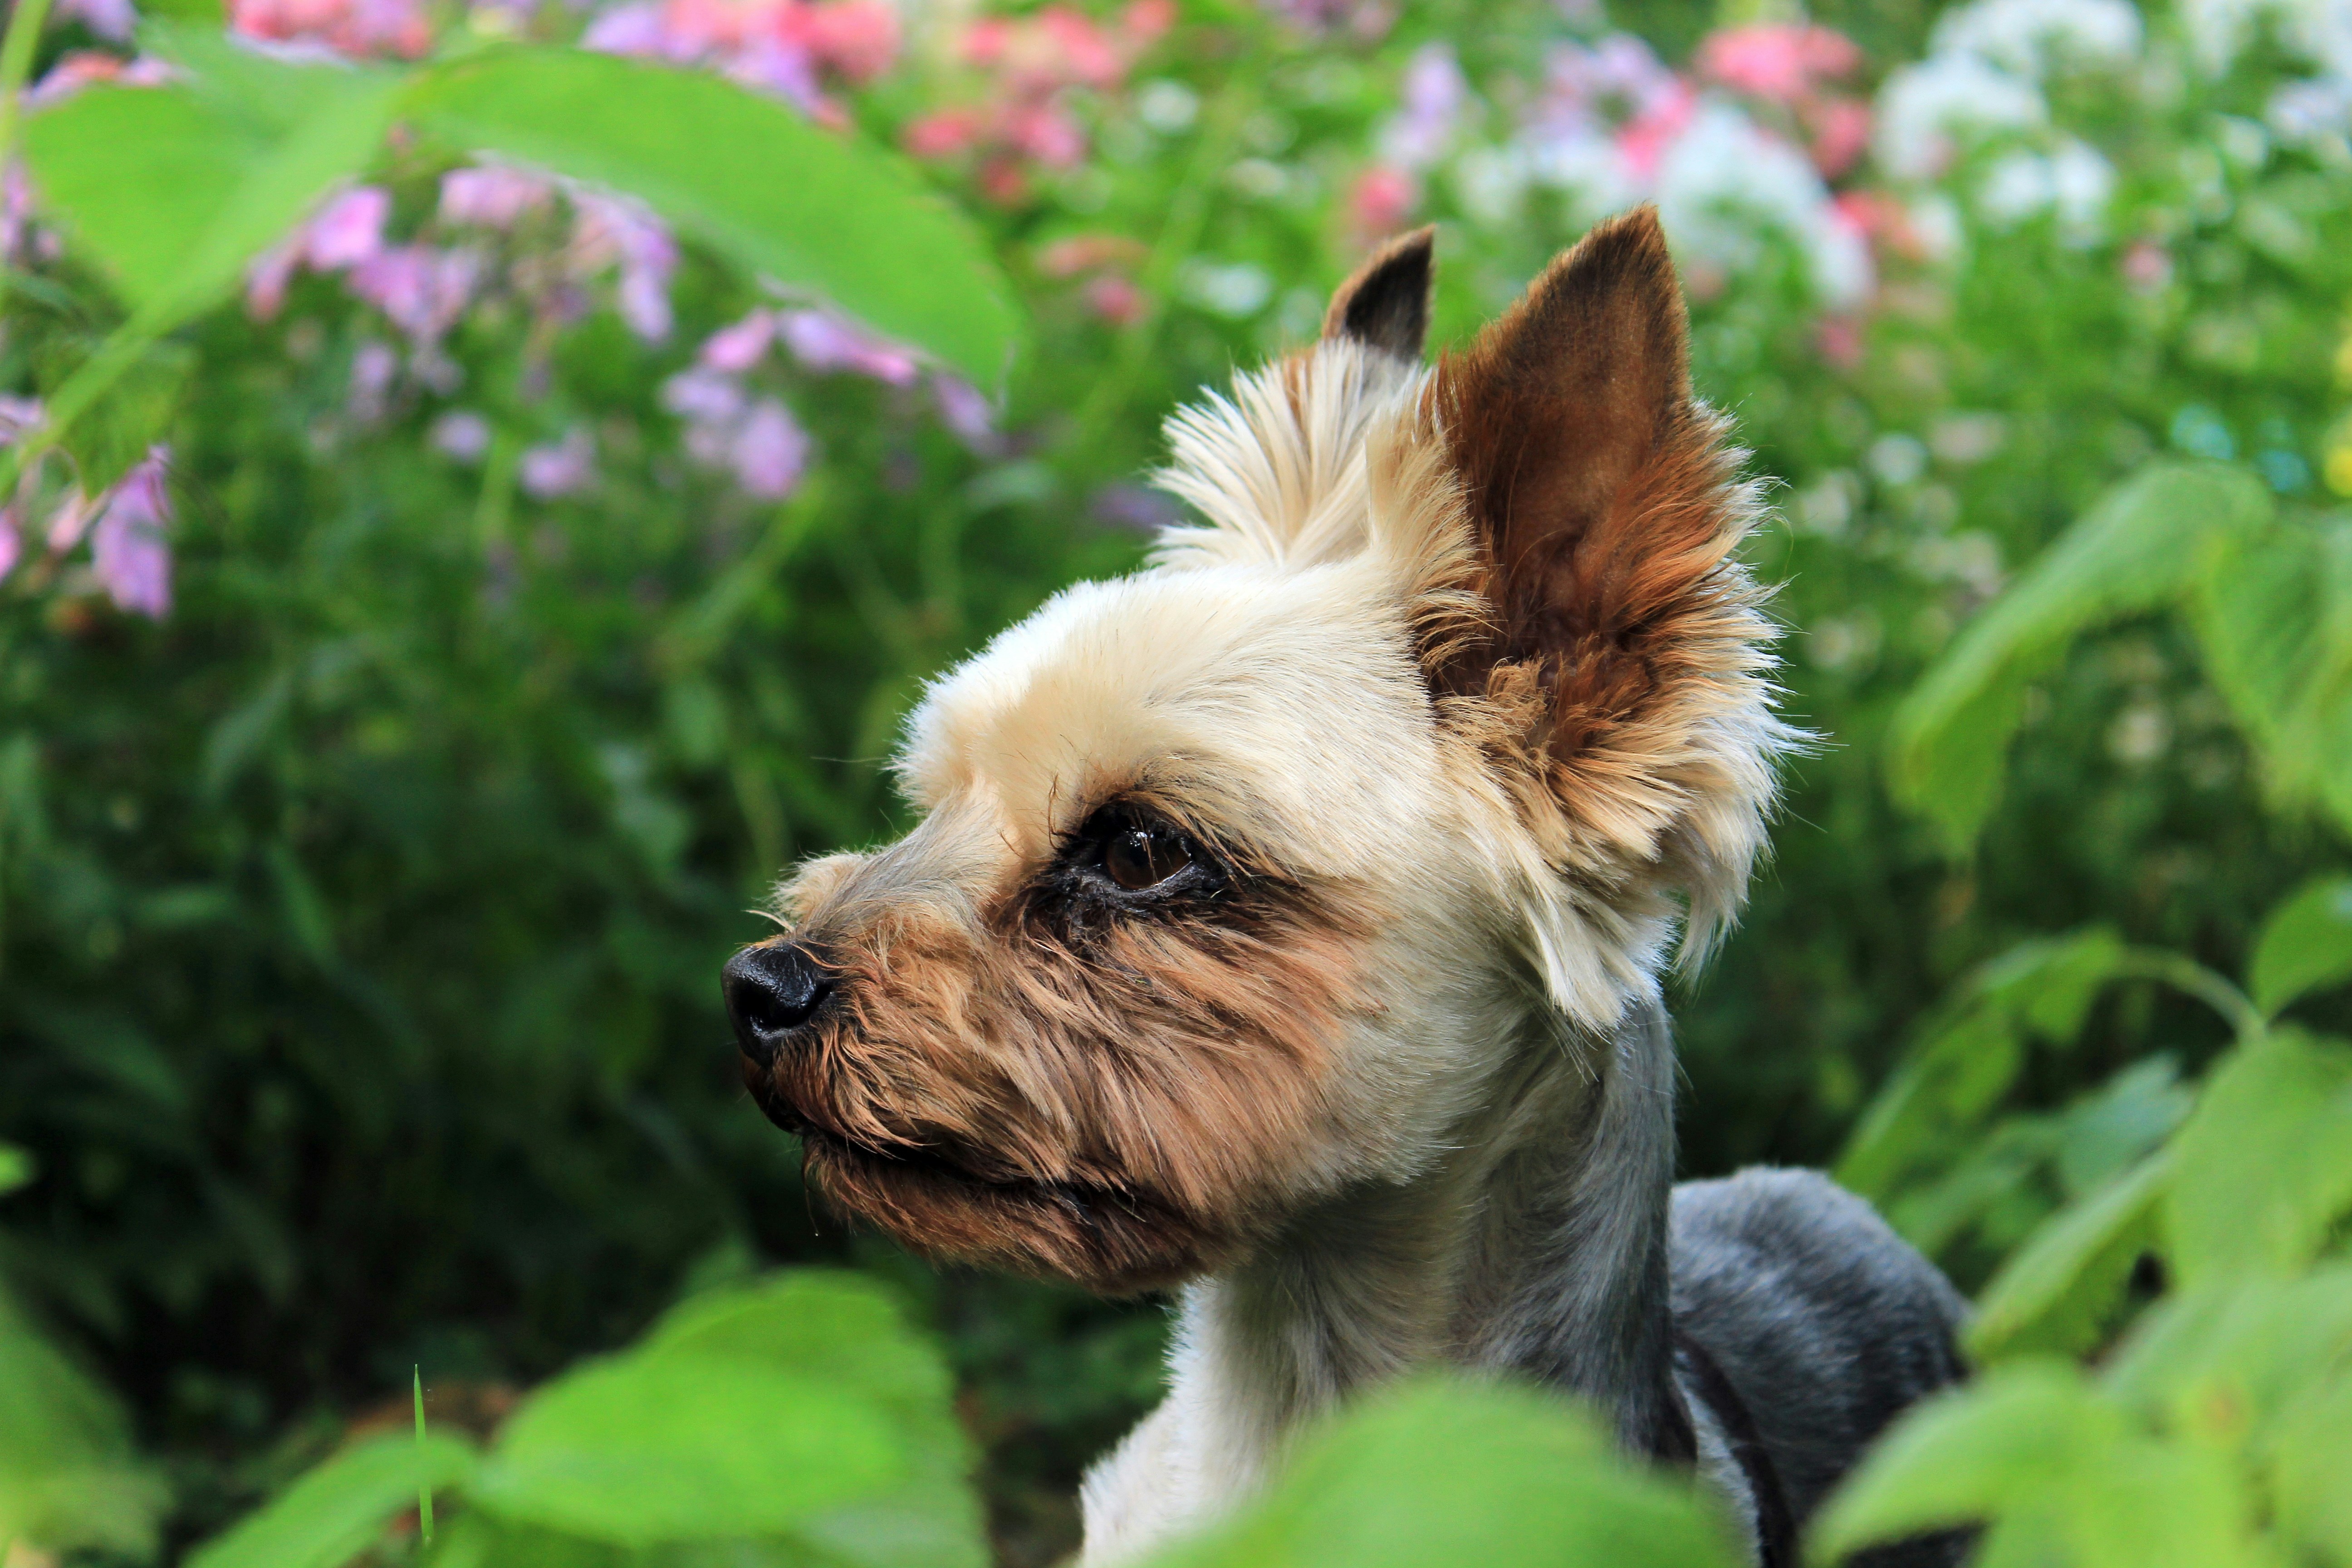 Yorkie dog breed outside in garden with flowers and grass